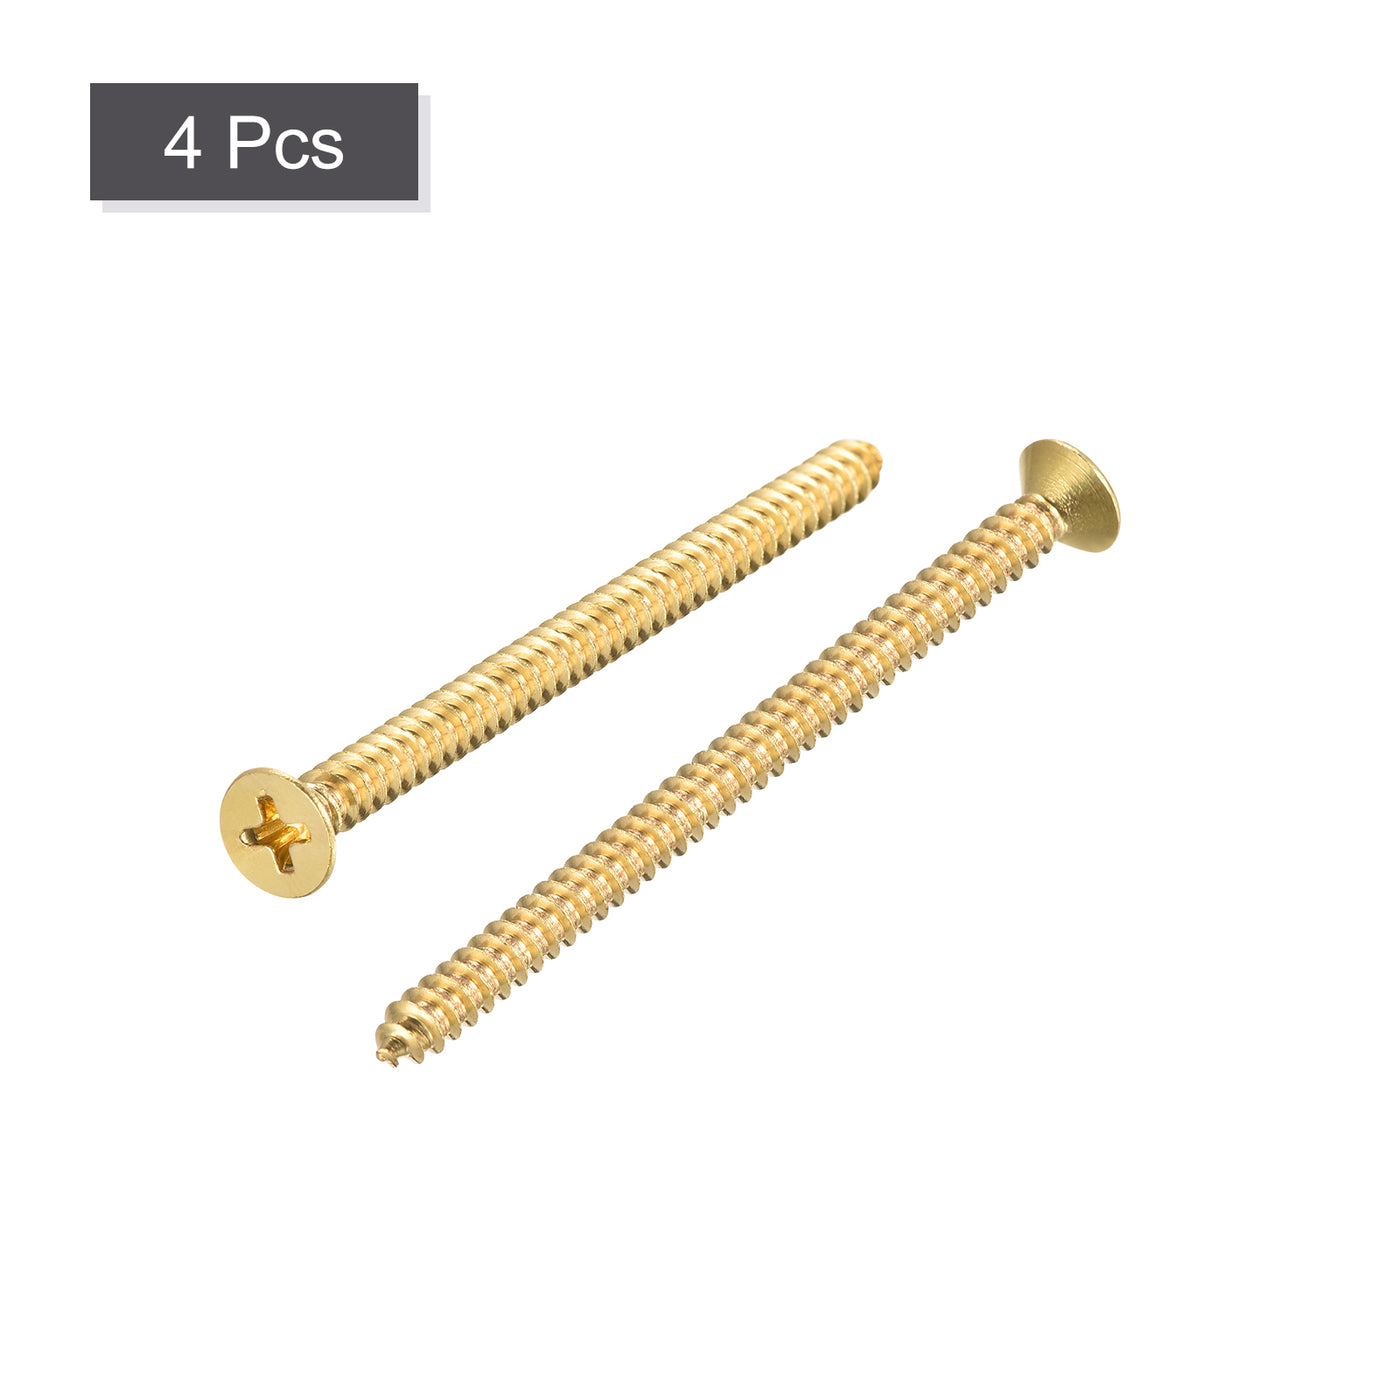 uxcell Uxcell Brass Wood Screws, M6x80mm Phillips Flat Head Self Tapping Connector for Door Hinges, Wooden Furniture, Home Appliances 4Pcs